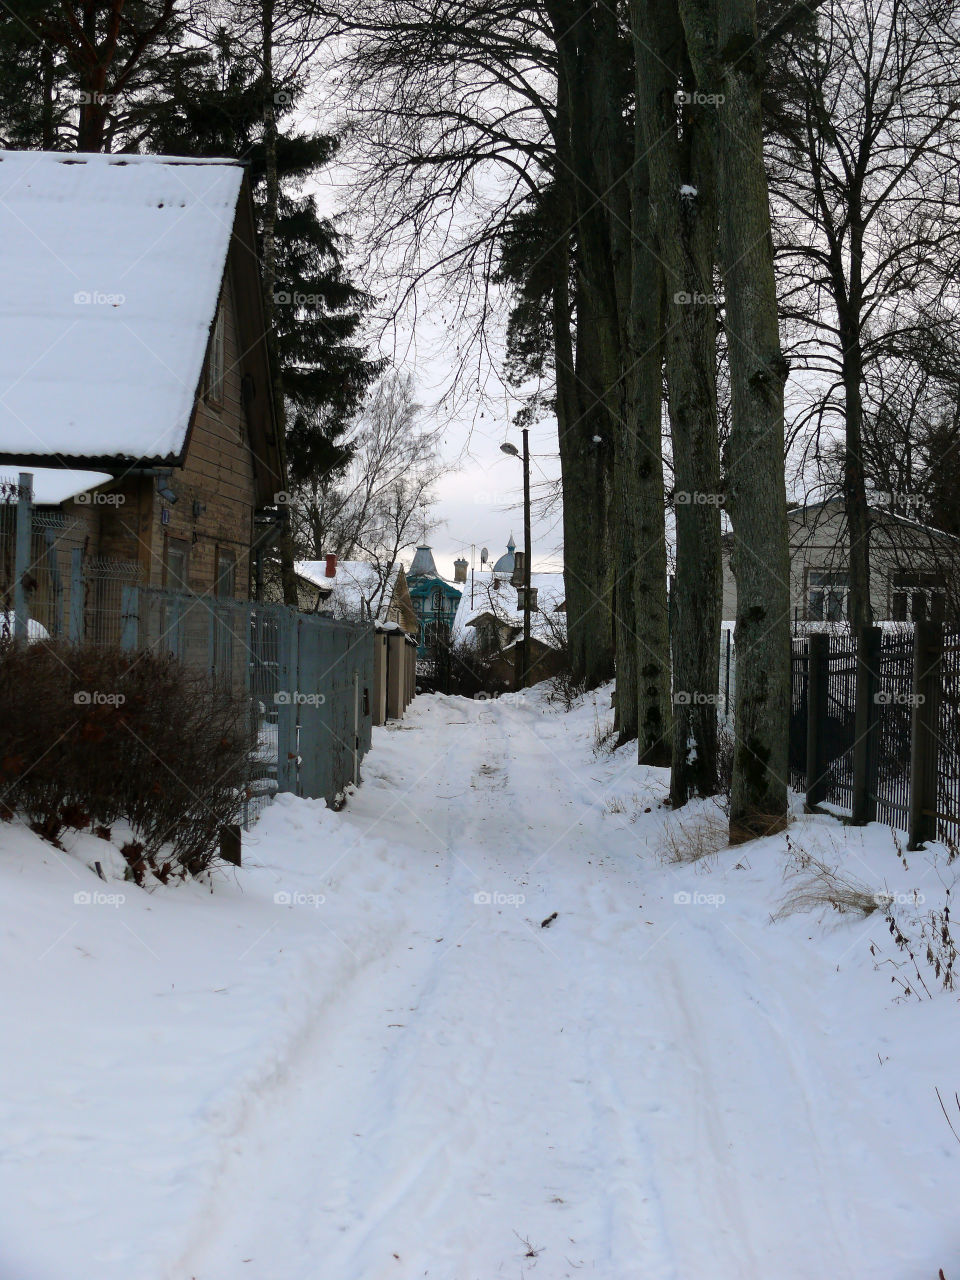 Trees amidst houses during winter in Jūrmala, Latvia.